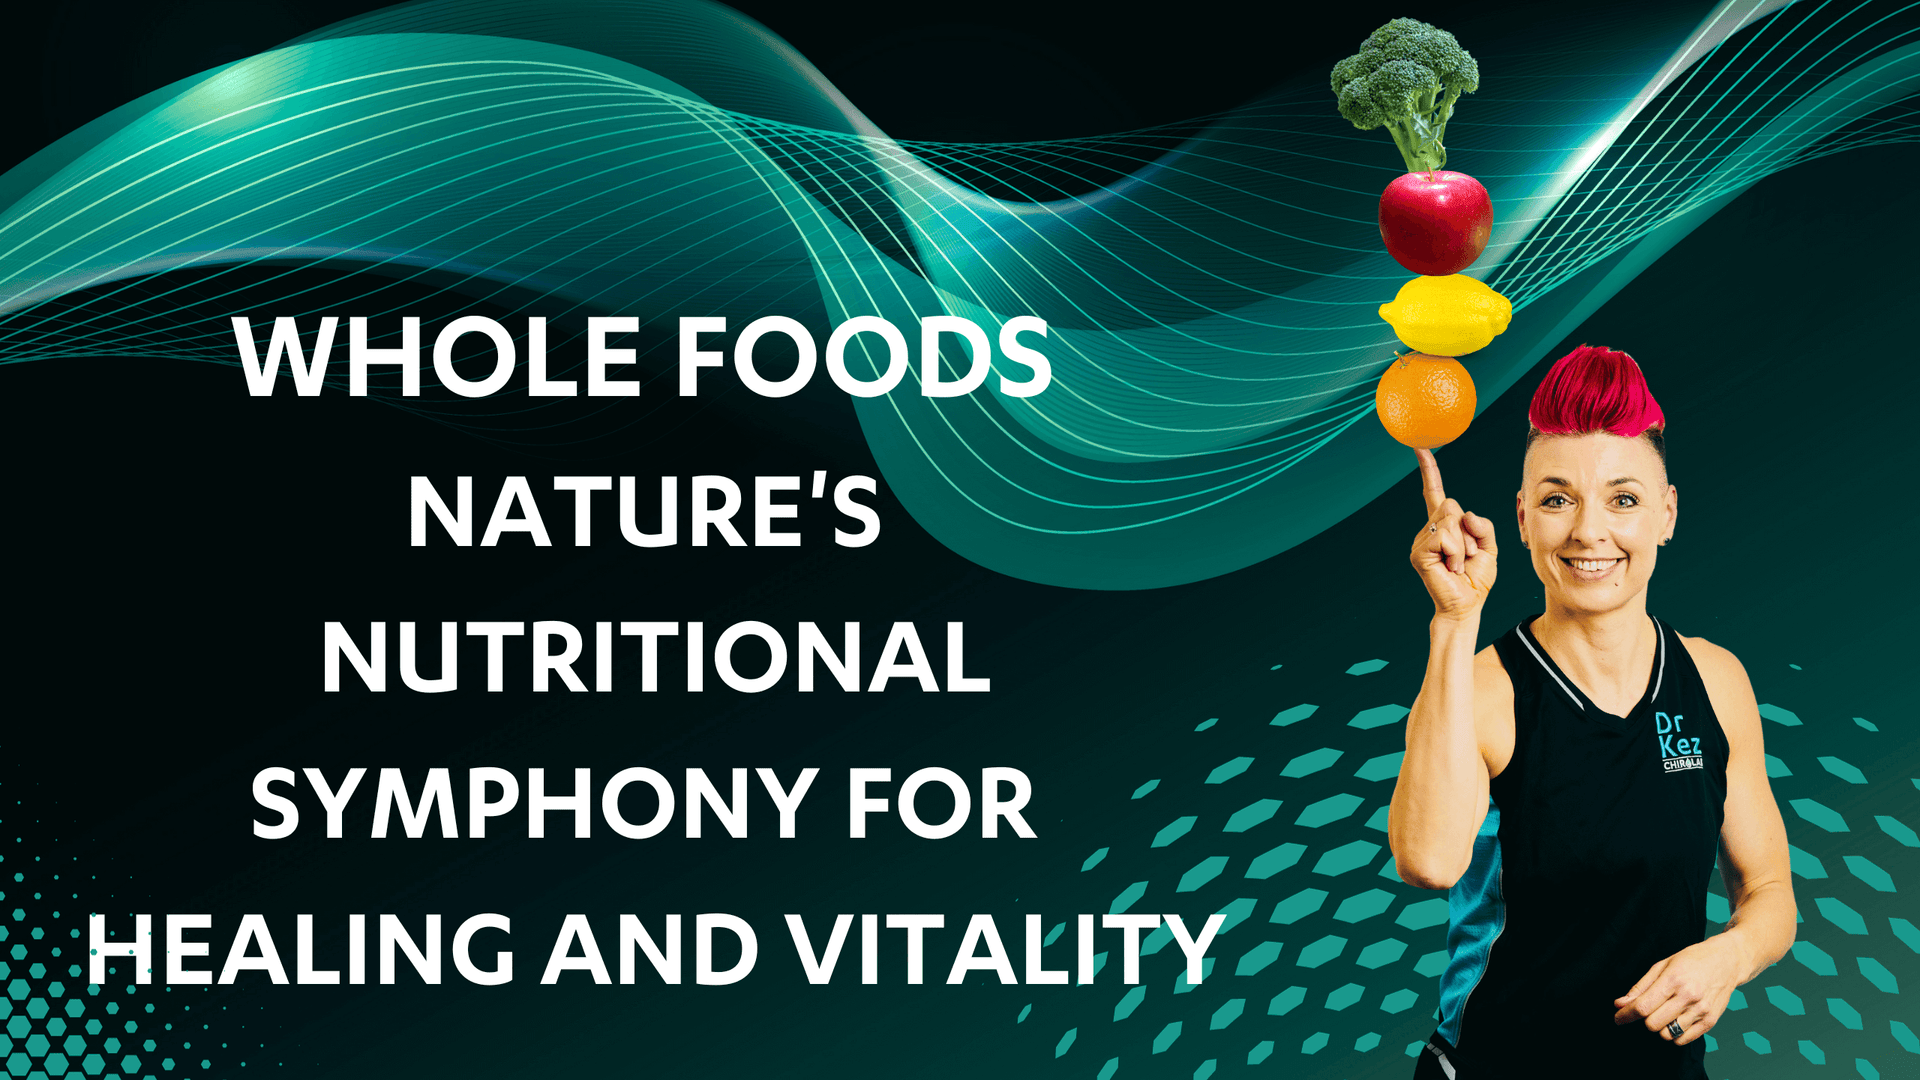 Whole Foods: Nature's Nutritional Symphony for Healing and Vitality